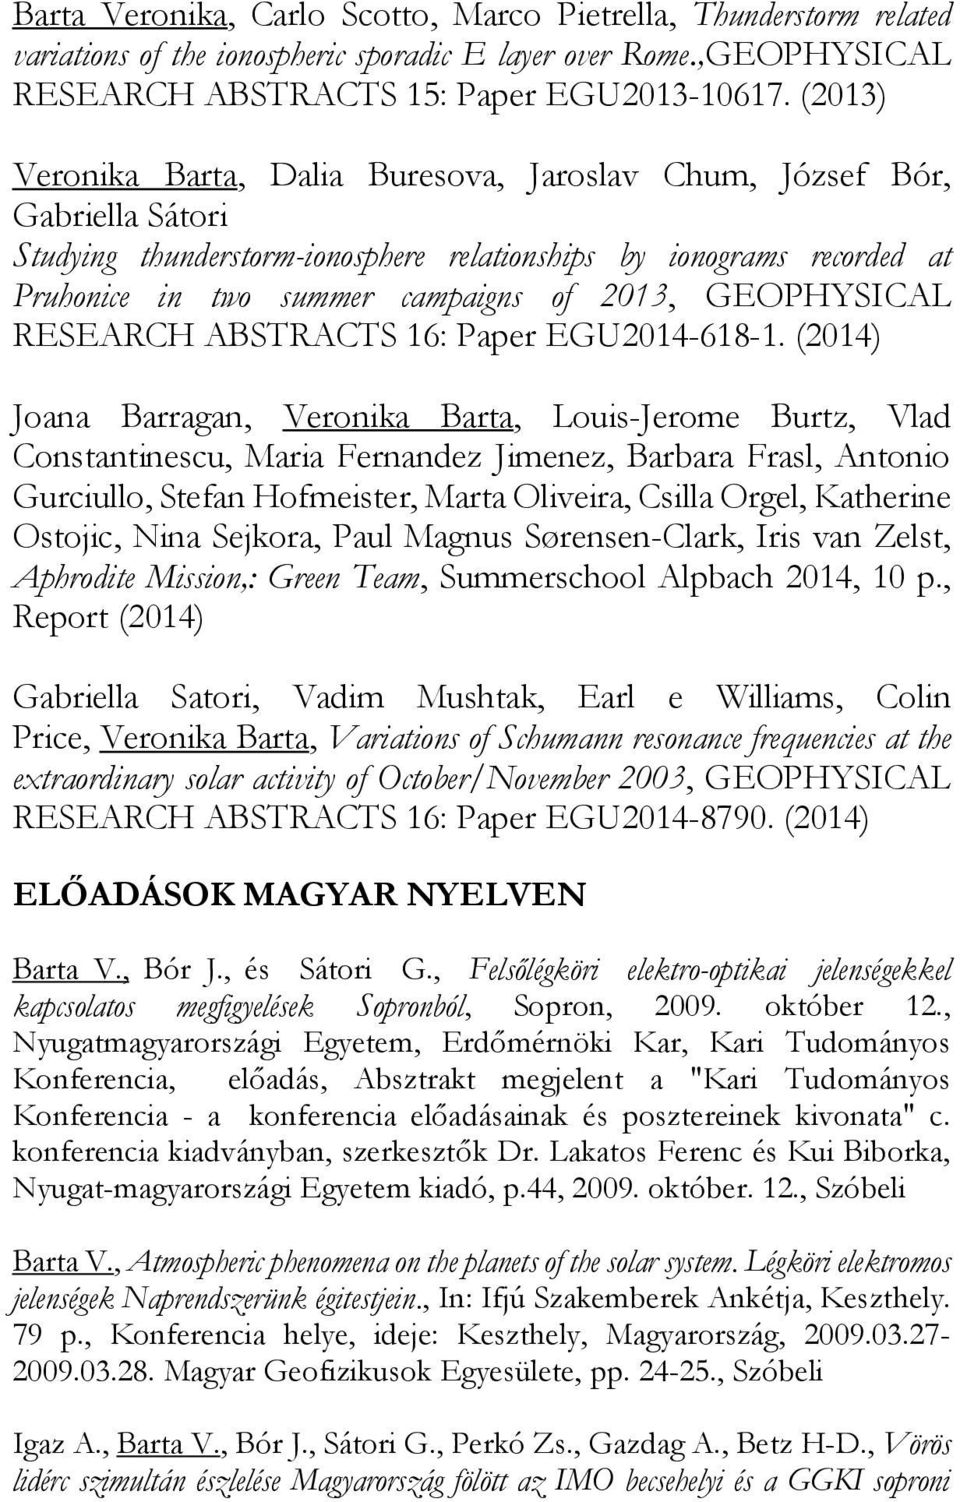 GEOPHYSICAL RESEARCH ABSTRACTS 16: Paper EGU2014-618-1.